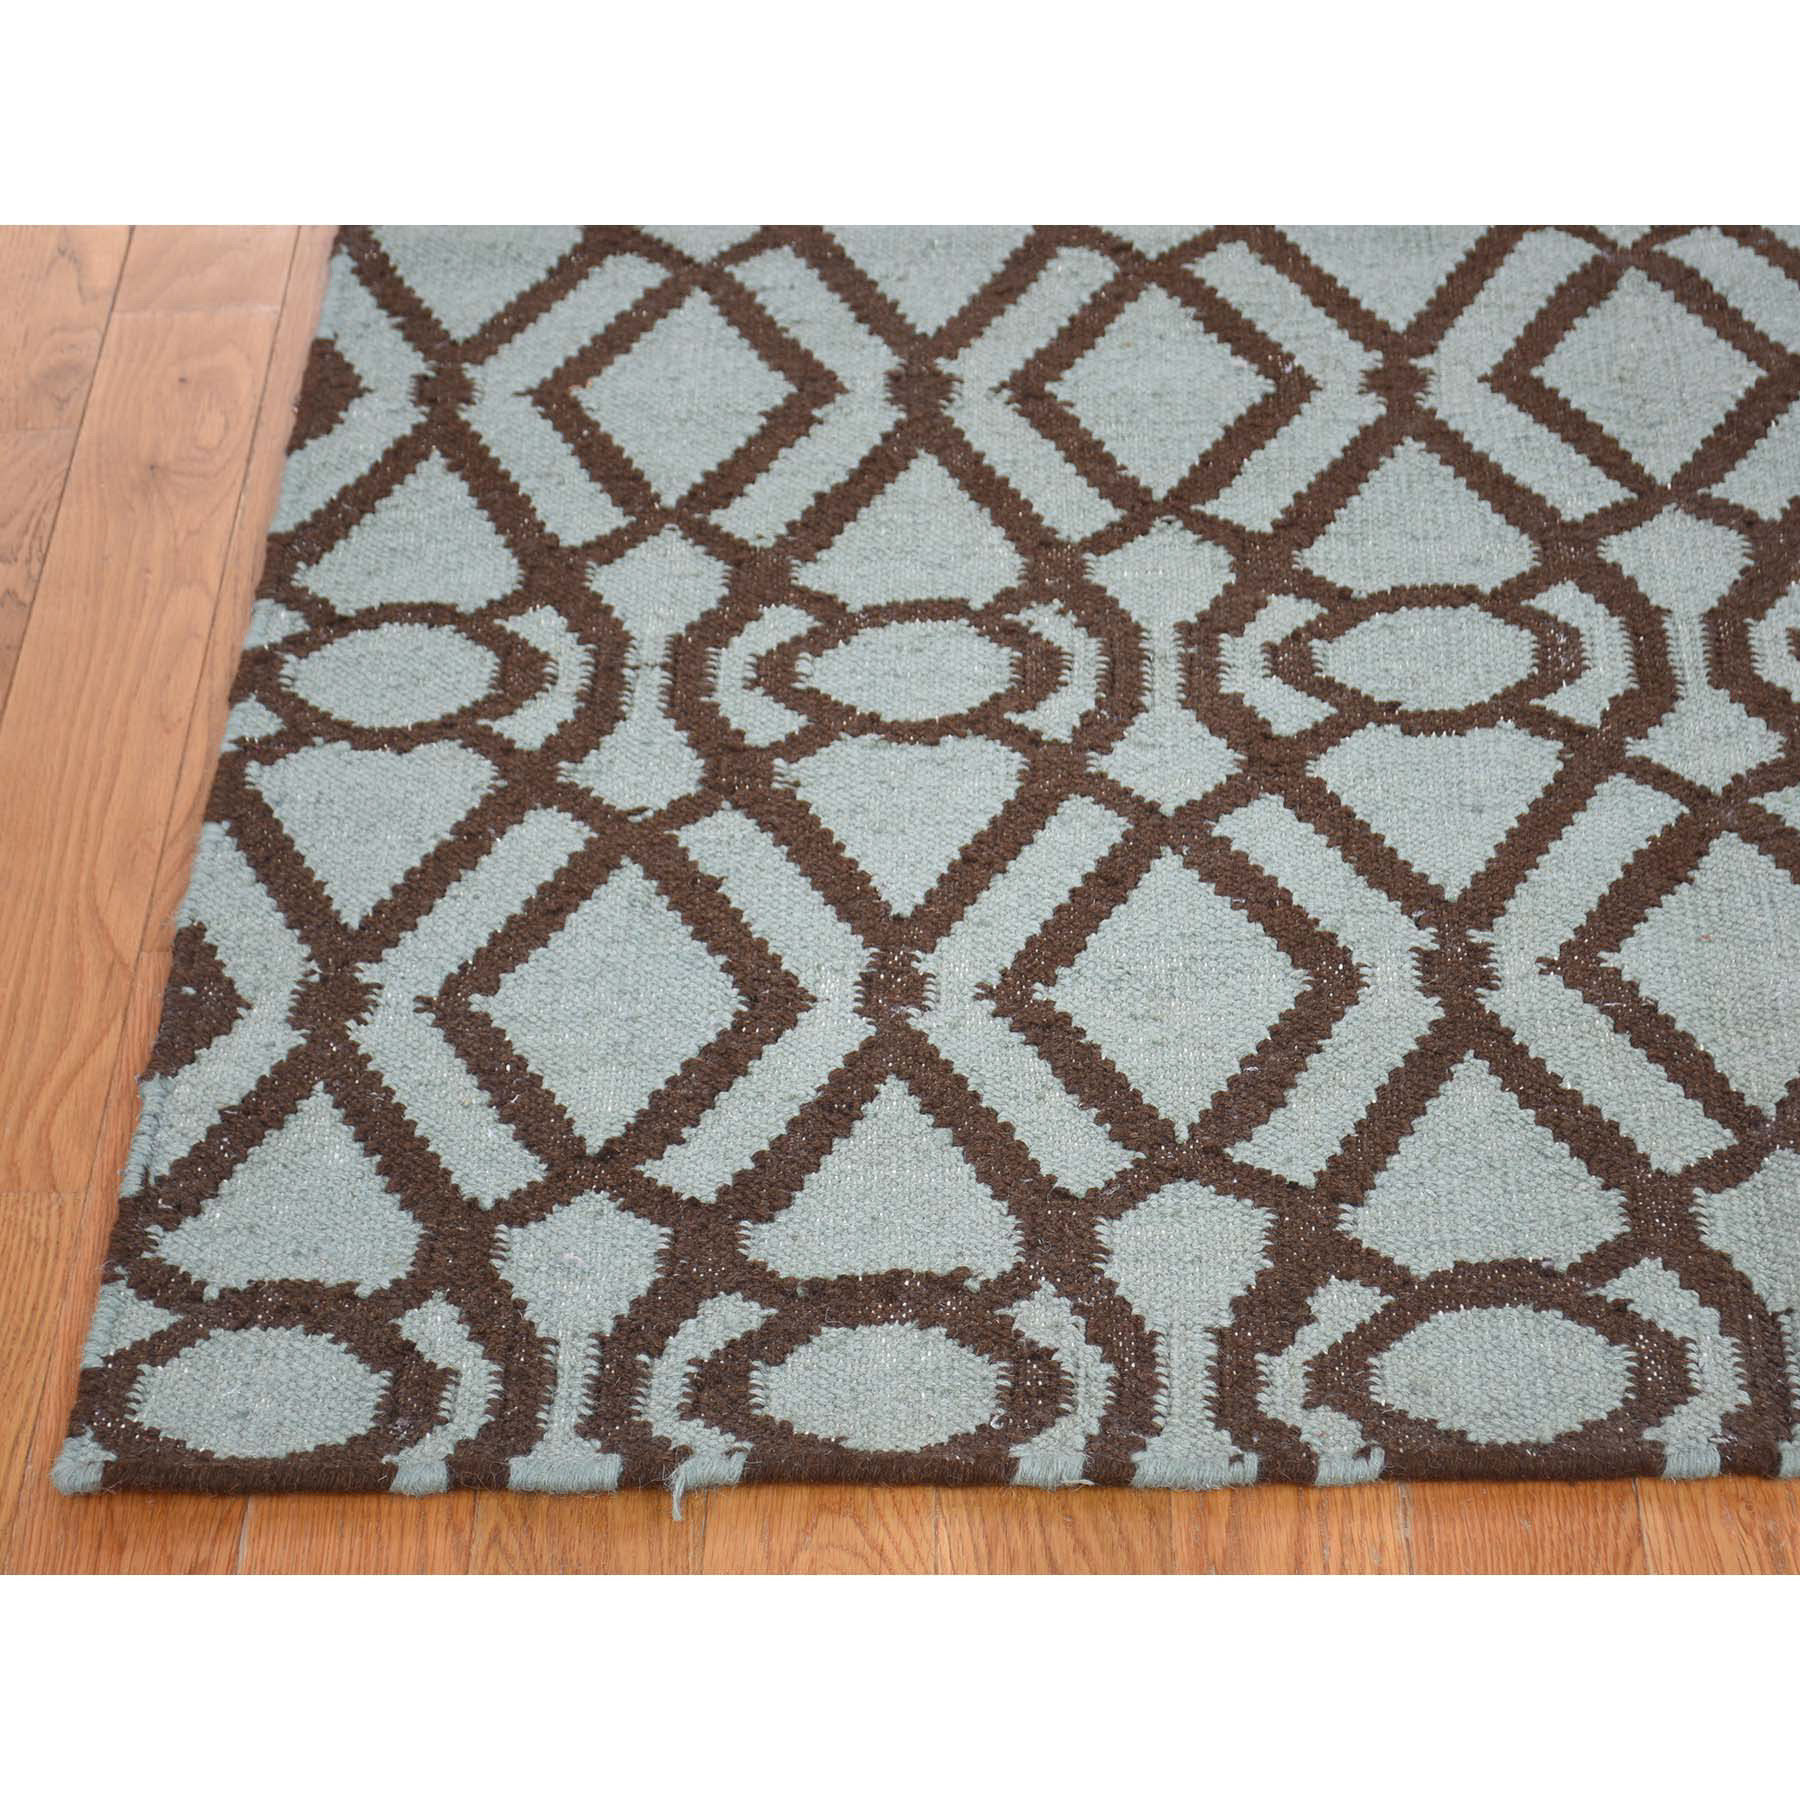 4'3''x5'10'' Hand Woven Light Green Durie Kilim Reversible Flat Weave Rug 